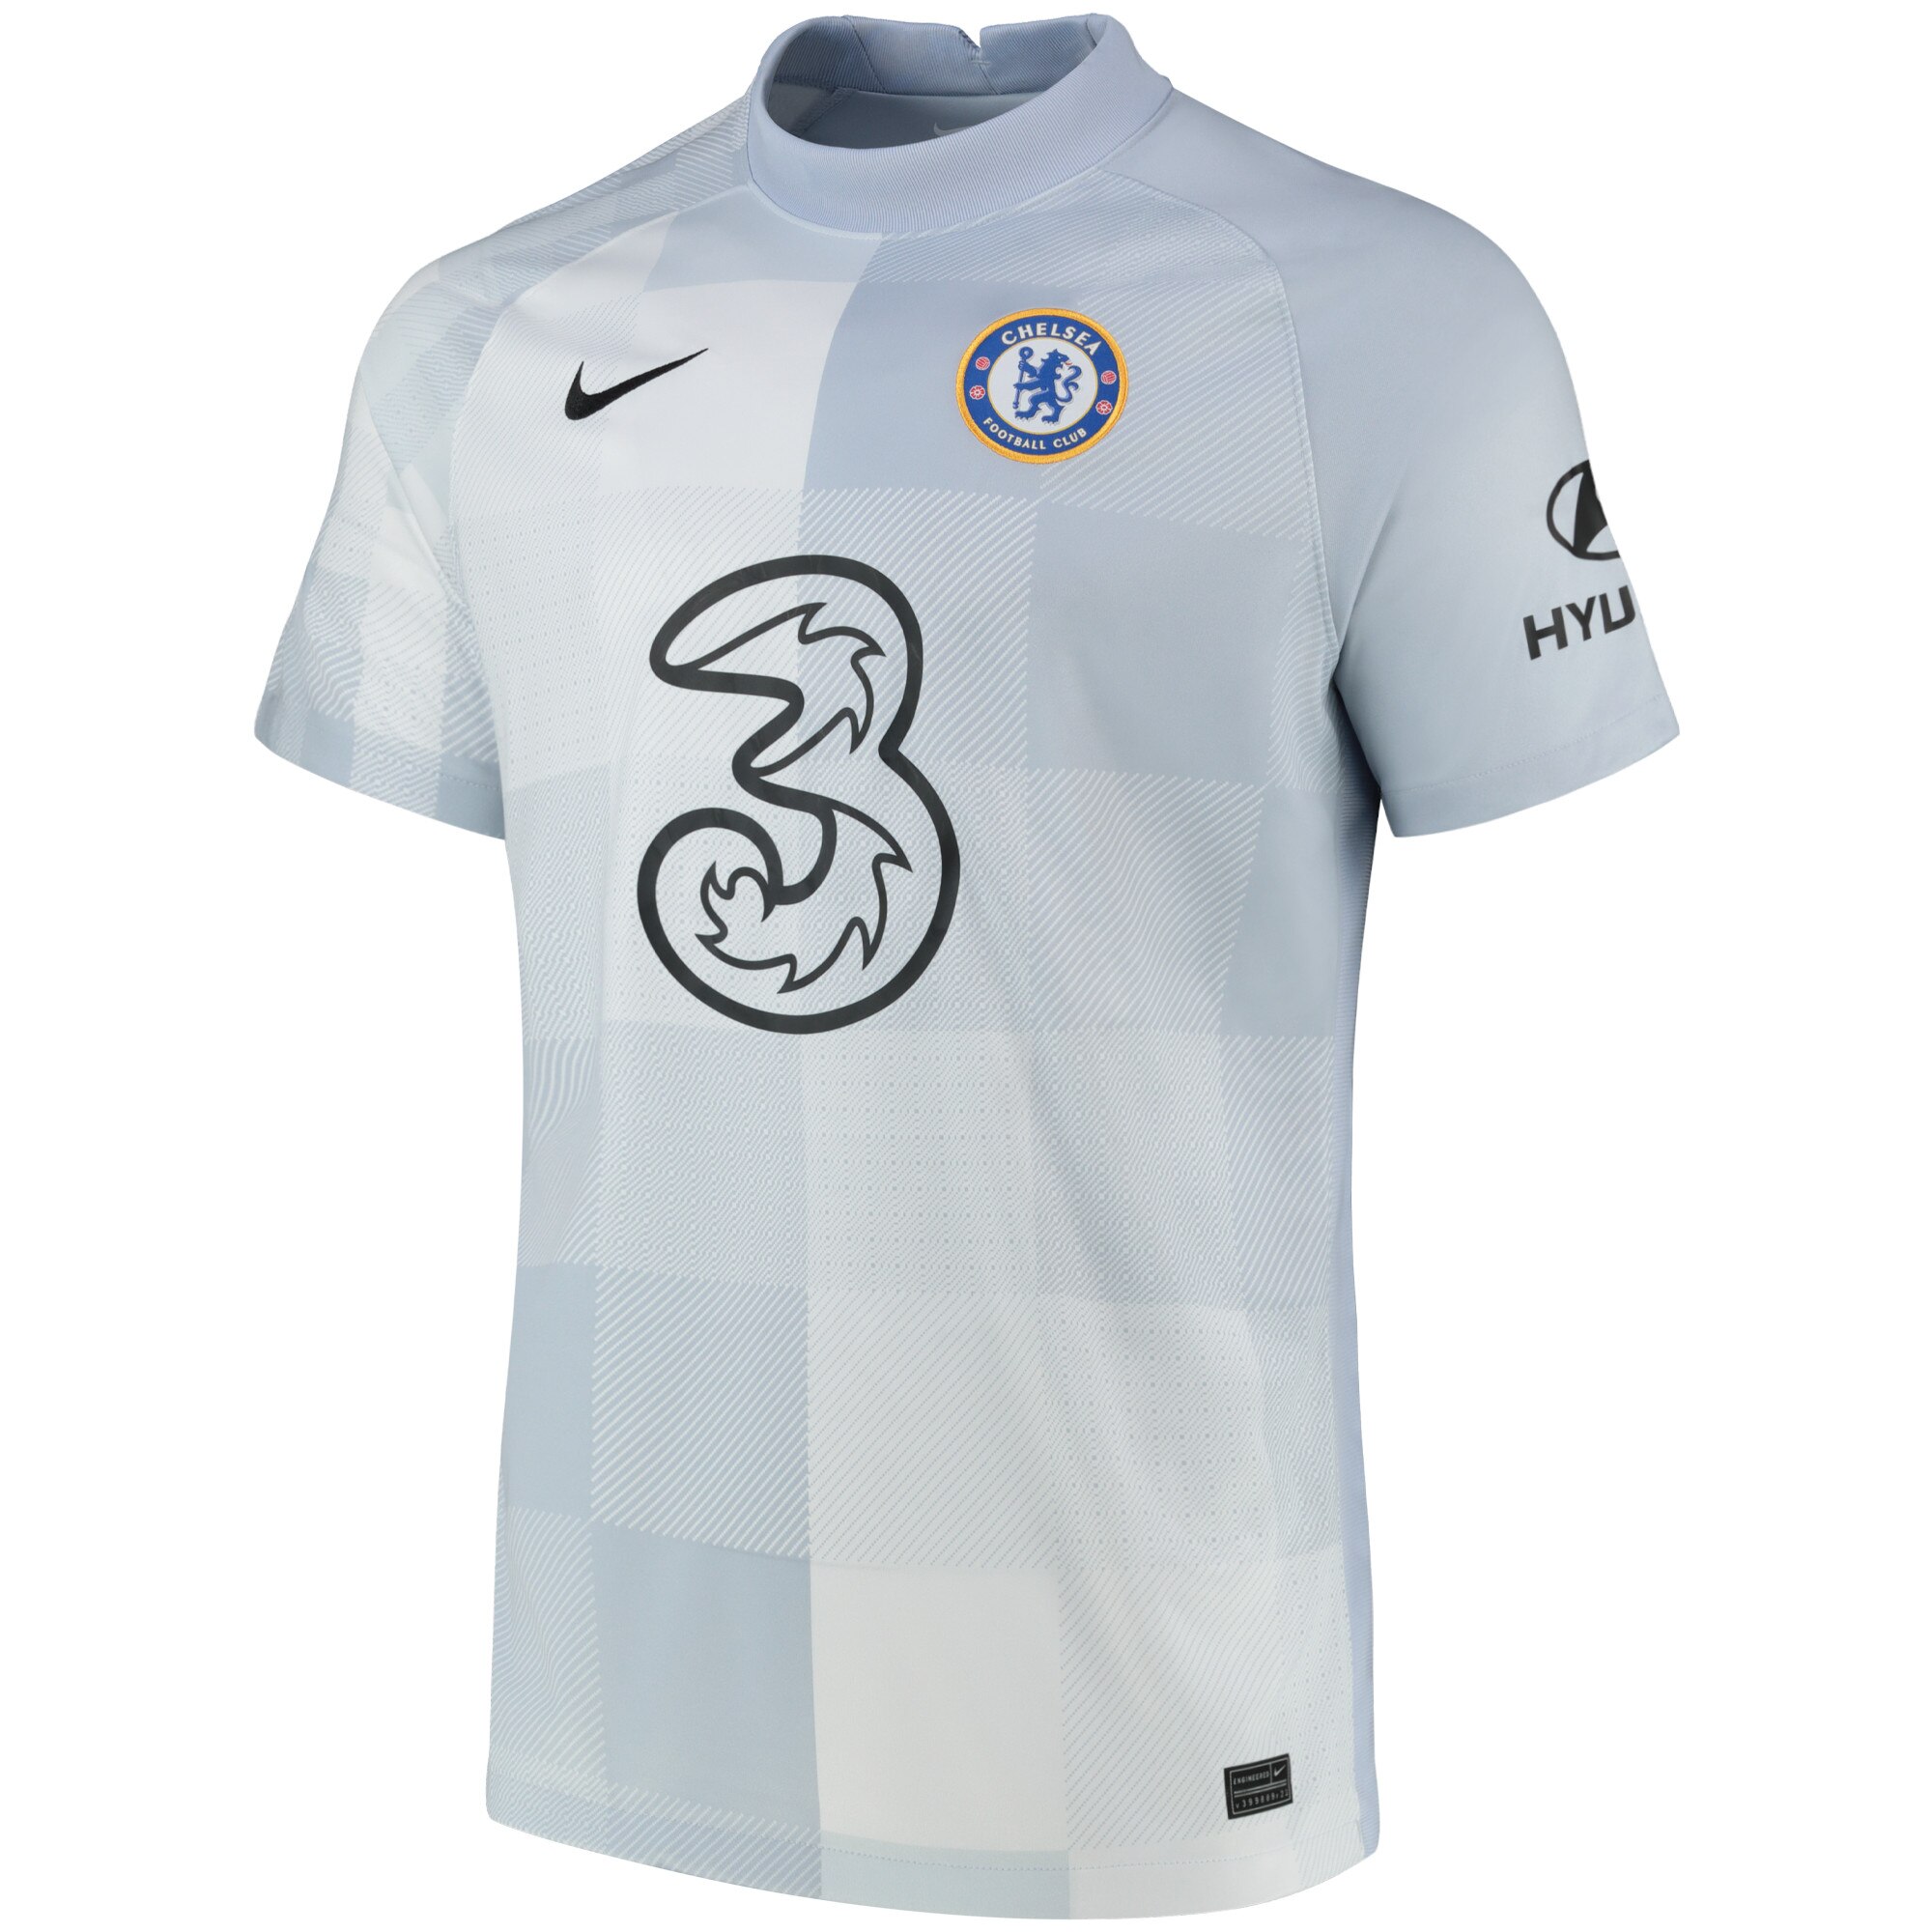 Chelsea Cup Goalkeeper Stadium Shirt 2021-22 with Bettinelli 13 printing